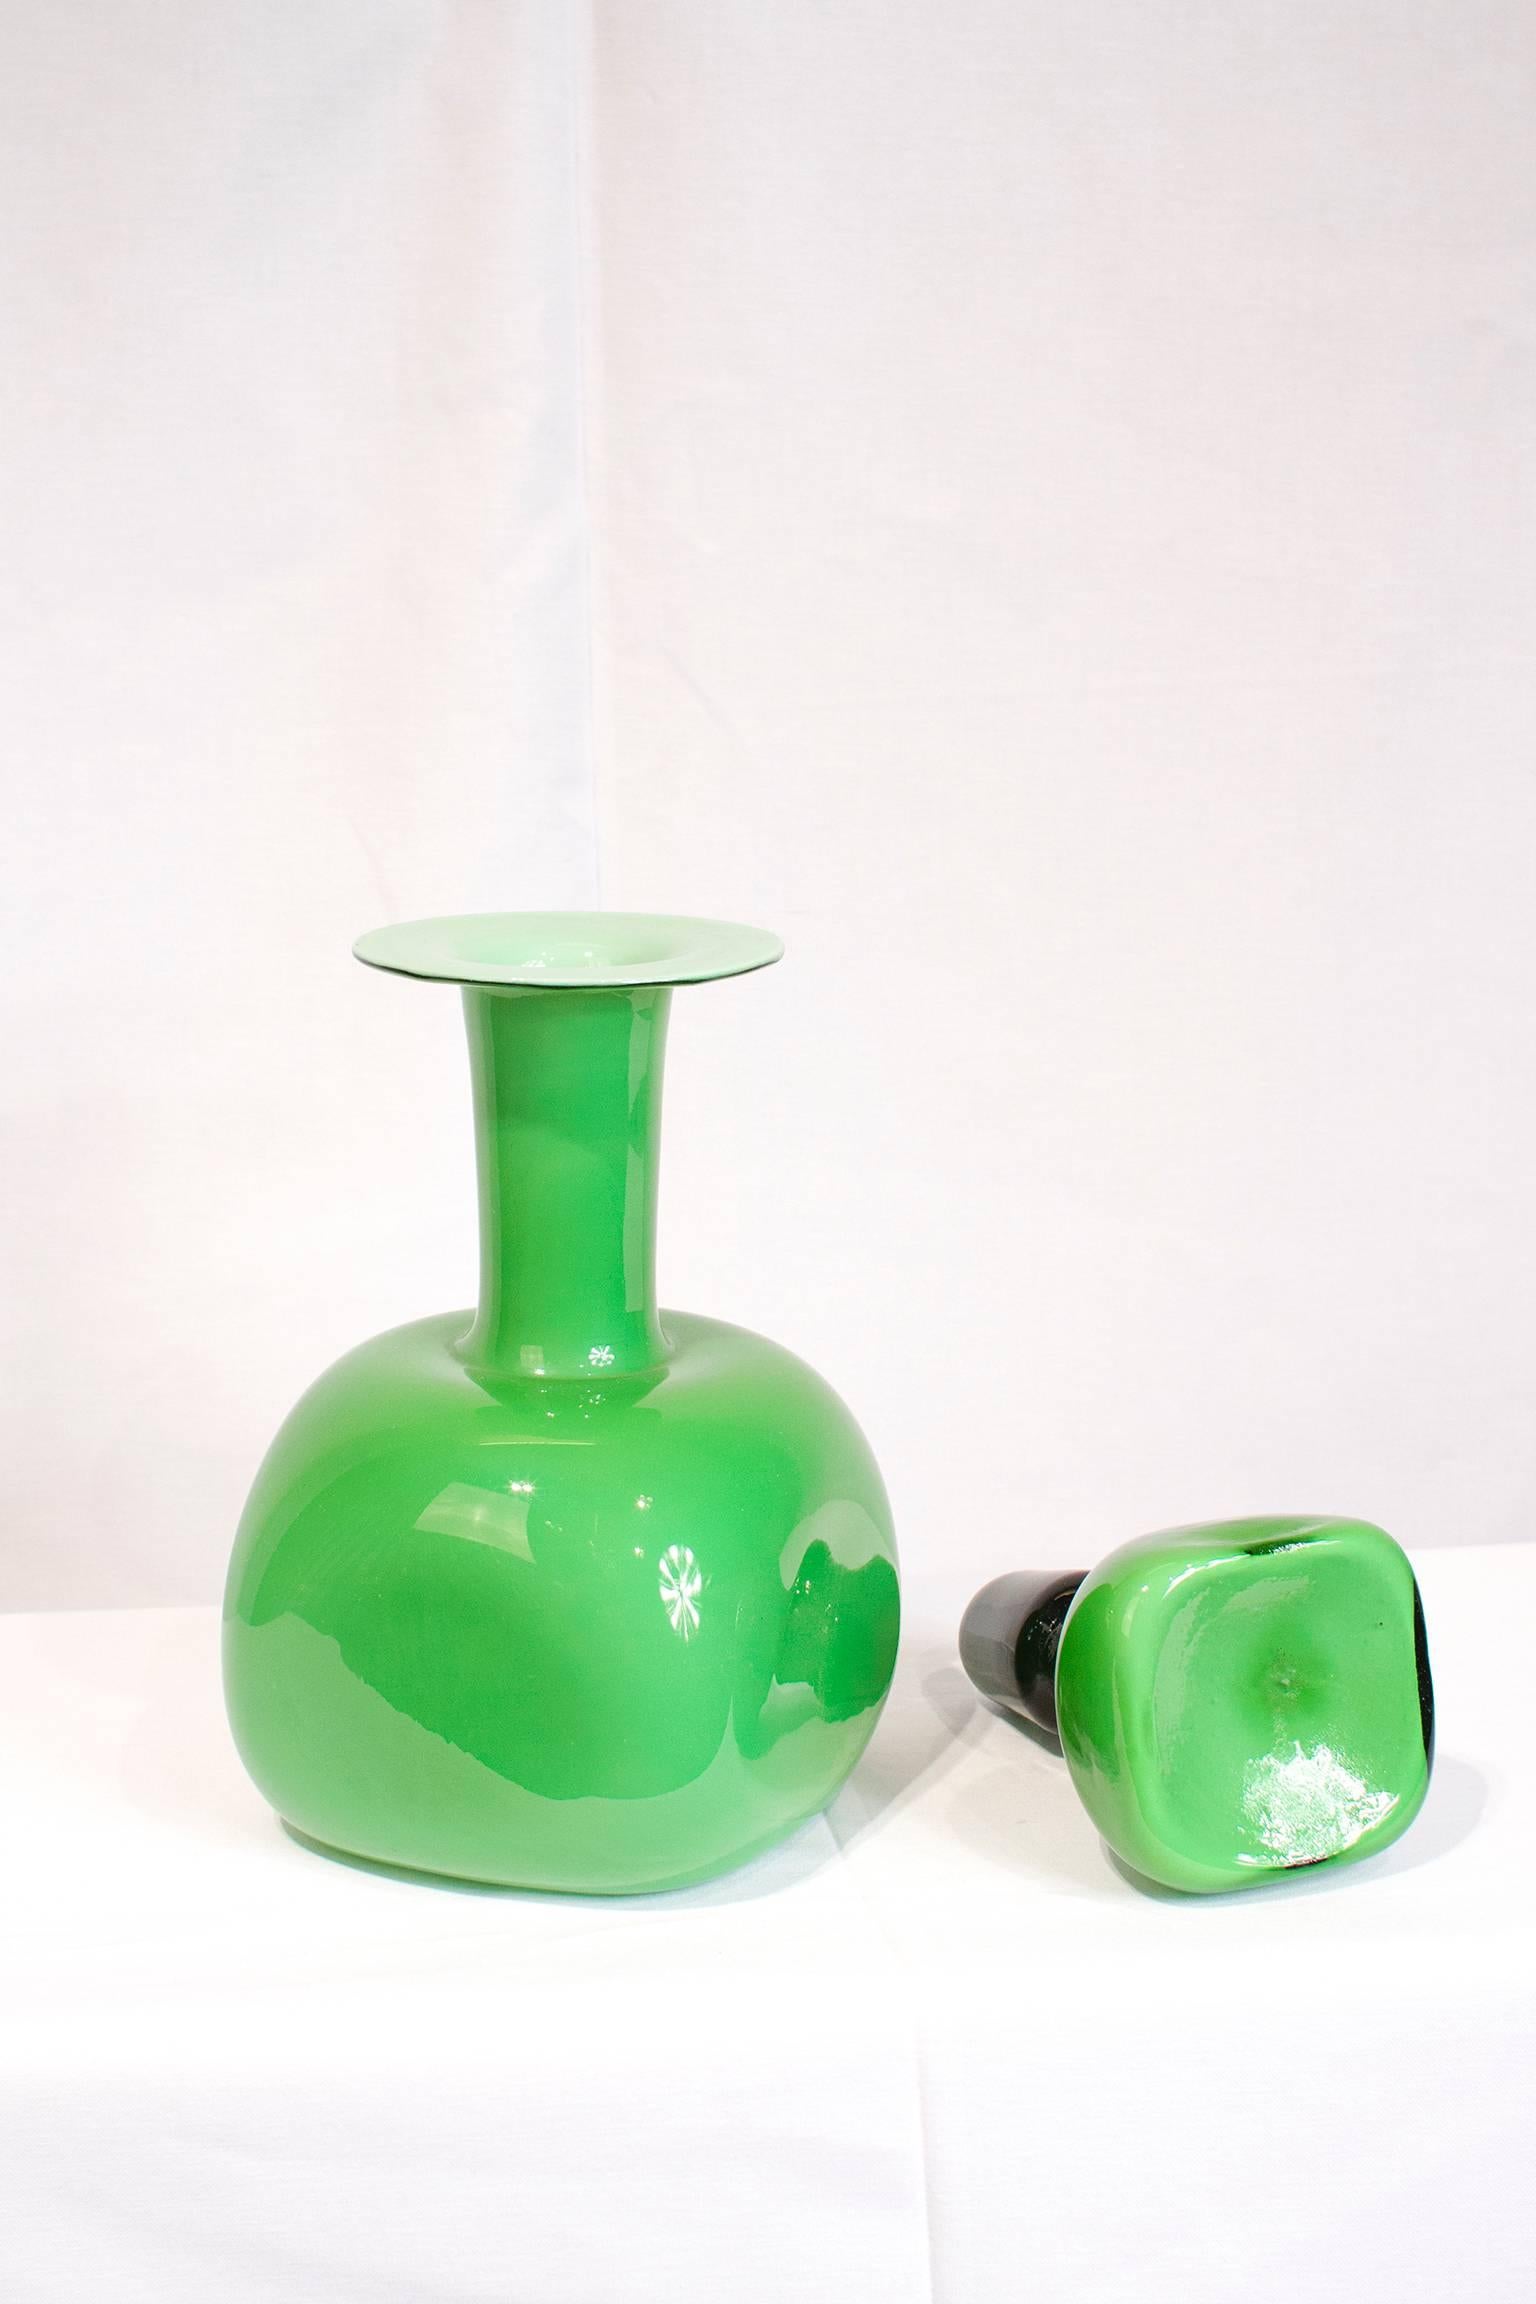 Otto Brauer green cased glass for Holmegaard, circa 1960. Excellent condition.
 
Please look at our storefront page to browse our entire collection. Please contact for delivery details.